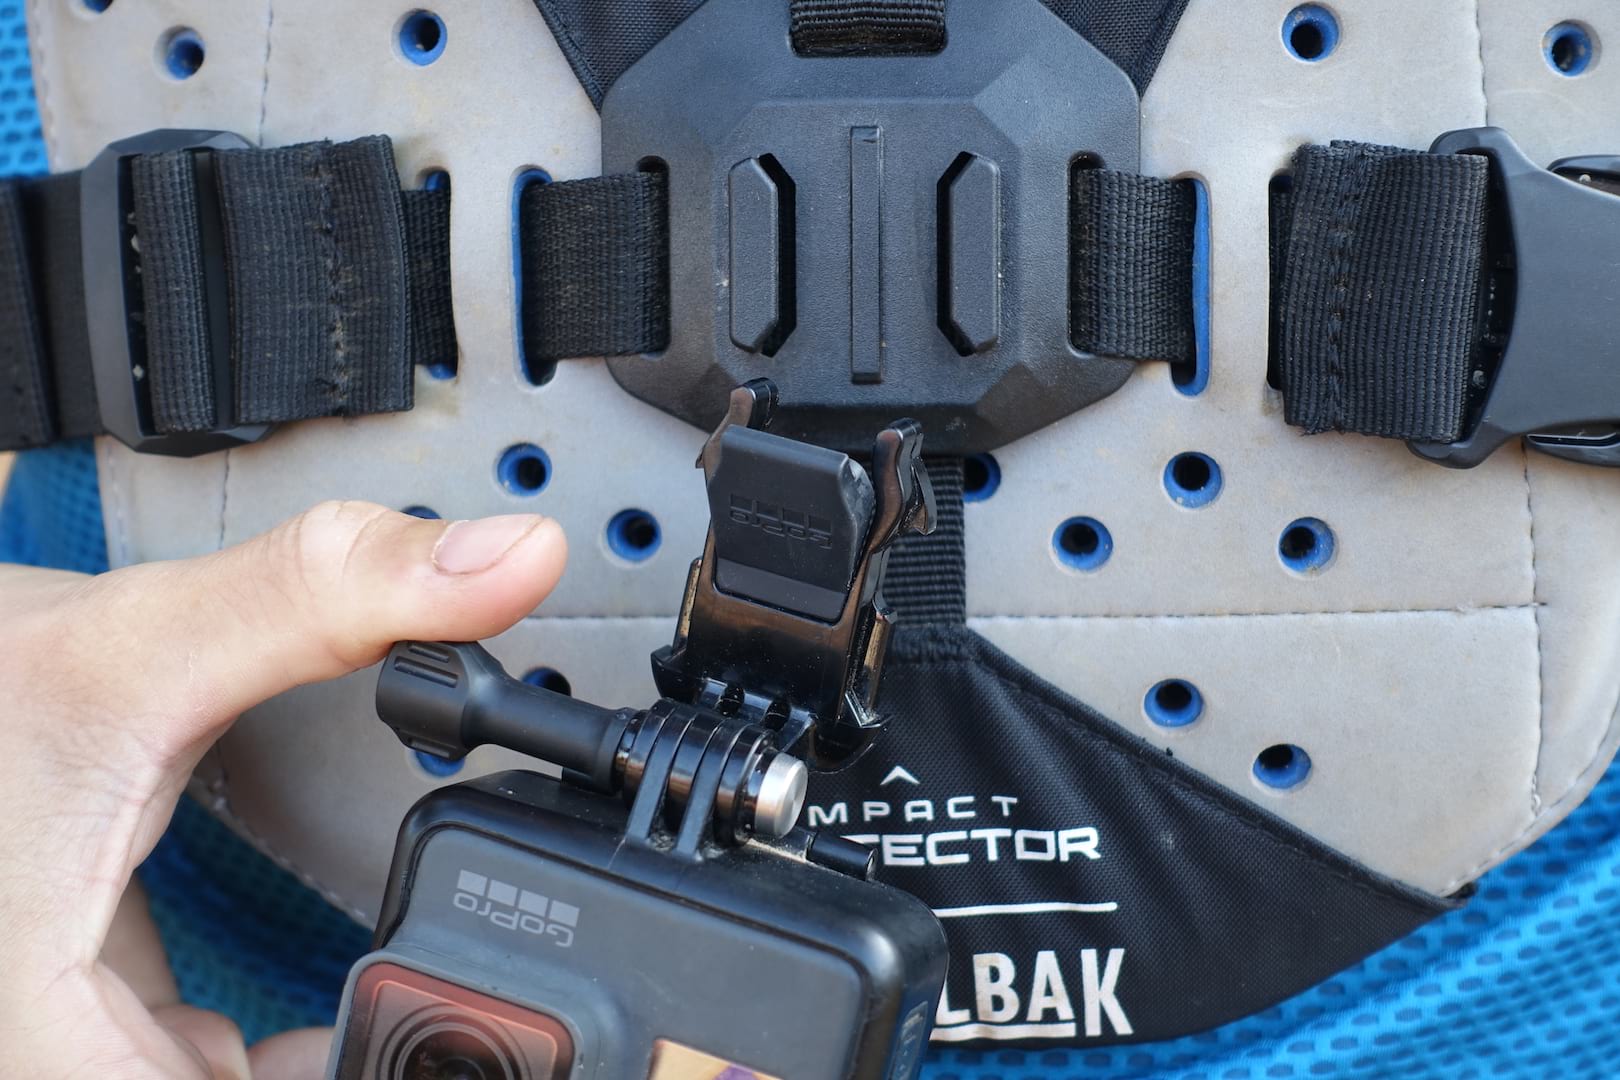 Skewer Yourself With A GoPro - Camelbak Protector Singletrack World Magazine